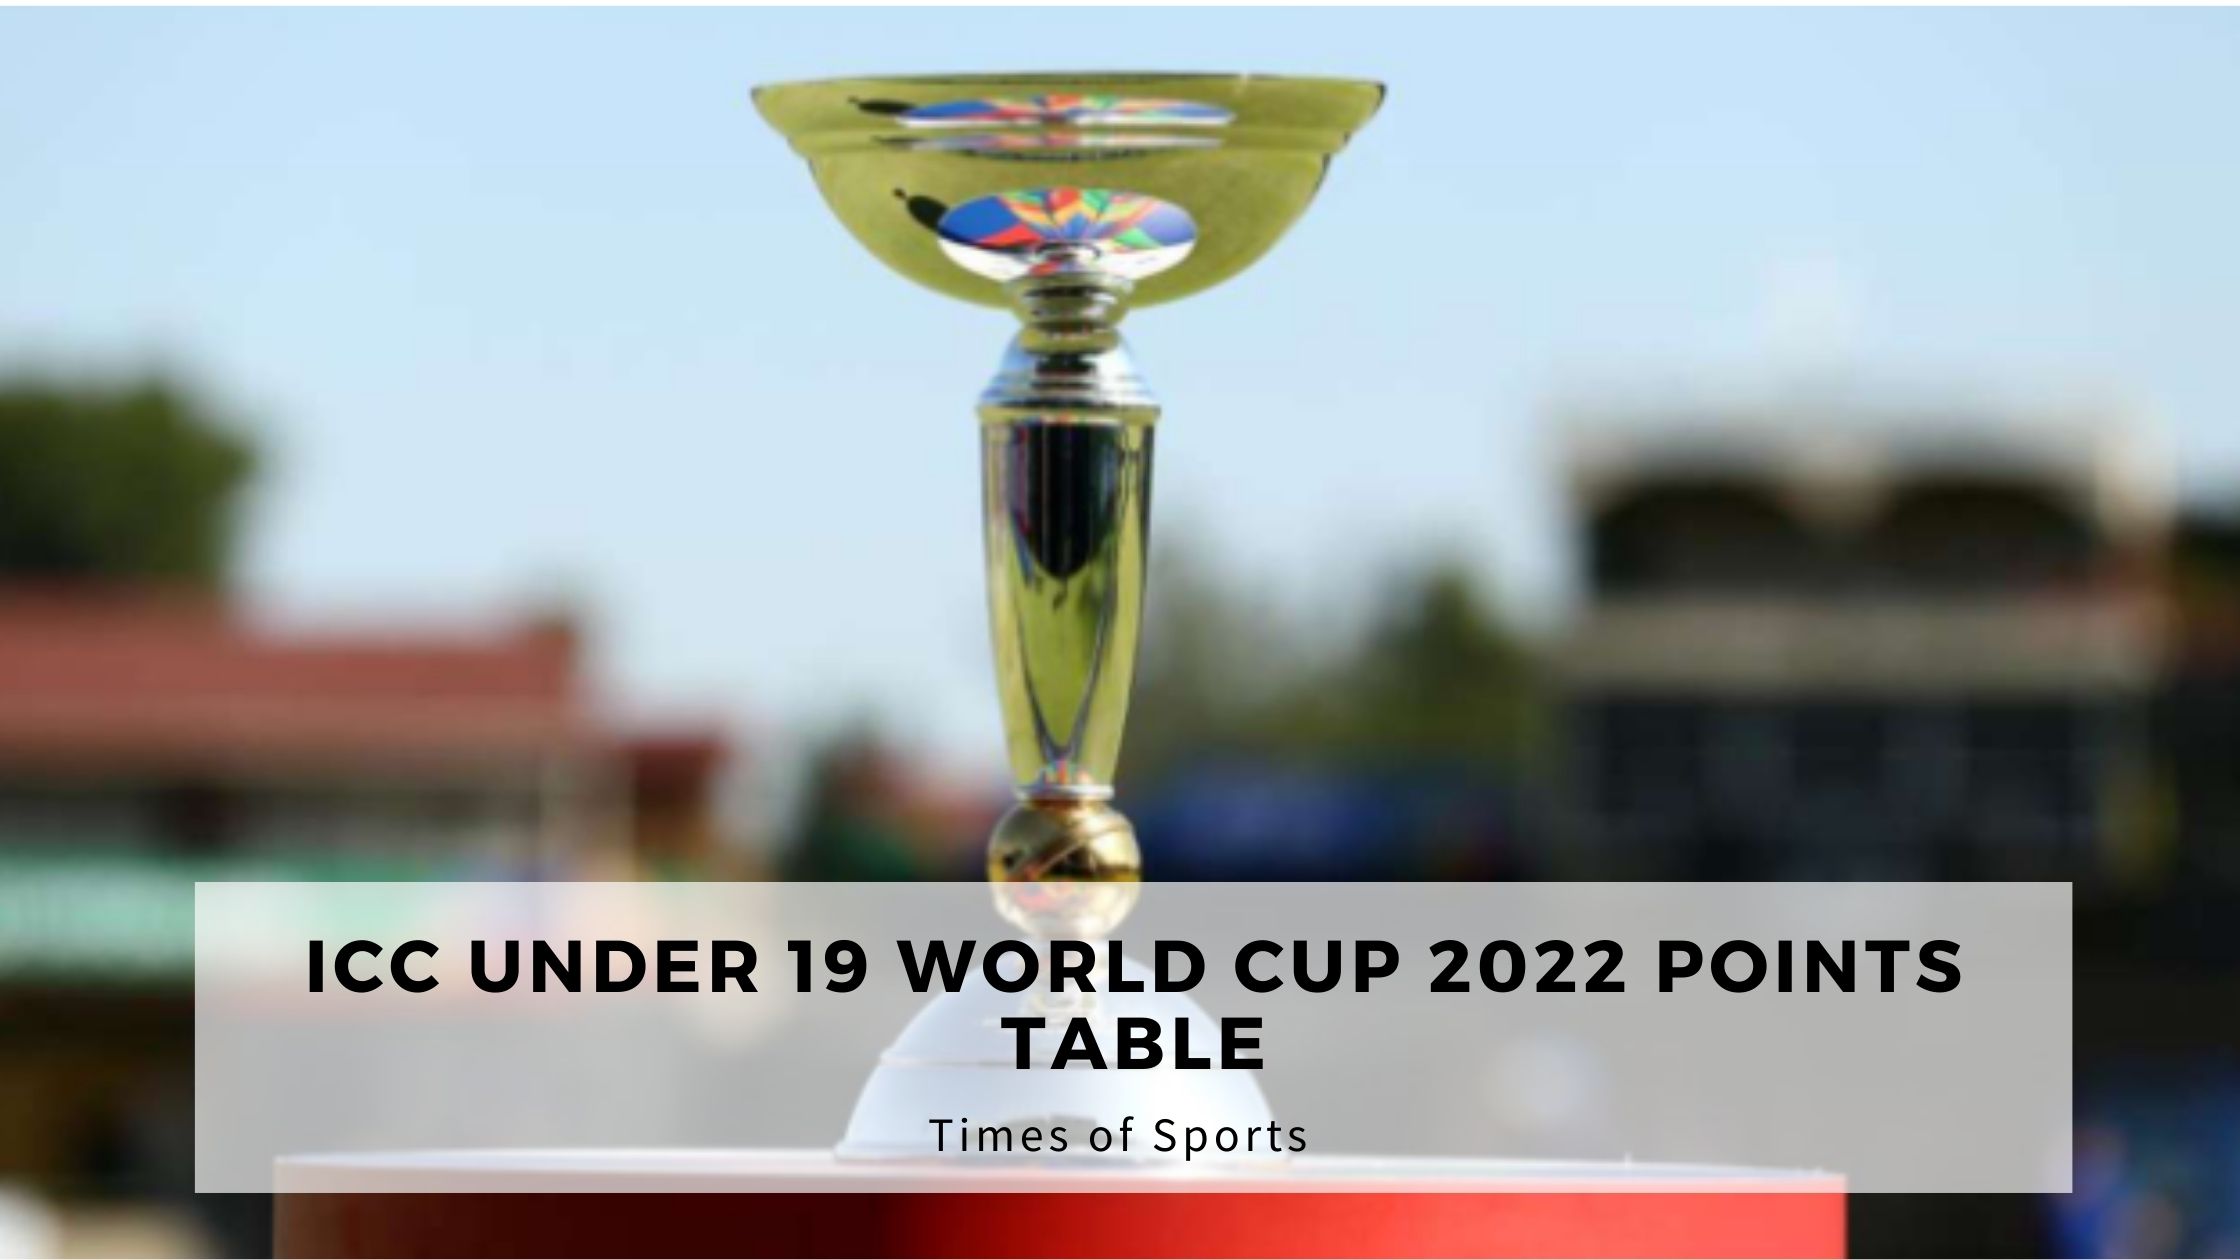 ICC Under 19 World Cup 2022 Points Table, Rules and Qualified Teams